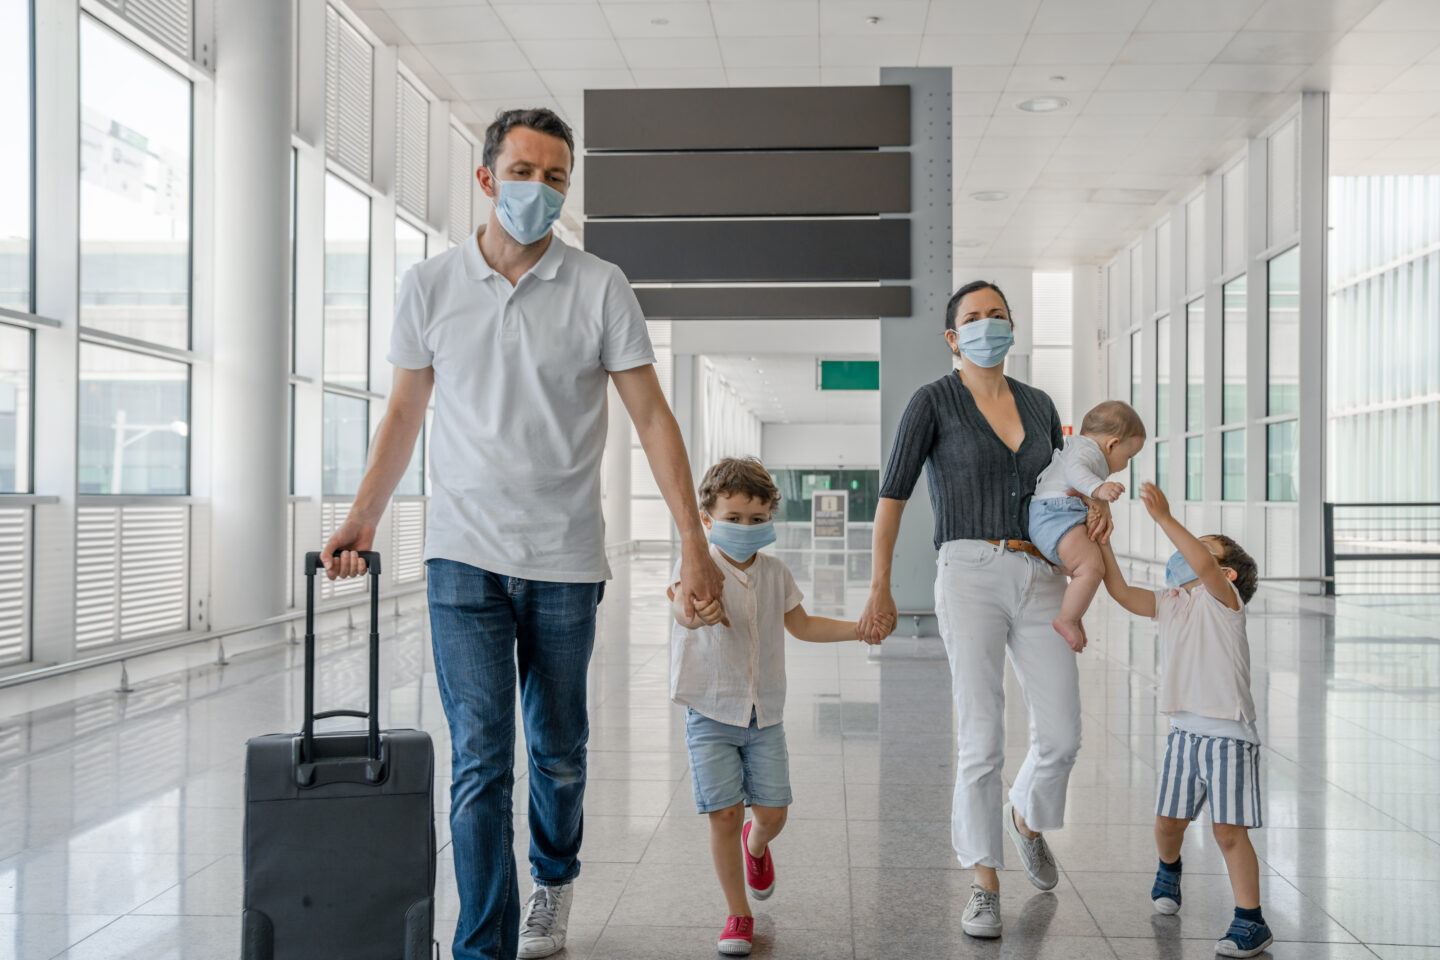 Family travelling with face masks for COVID-19